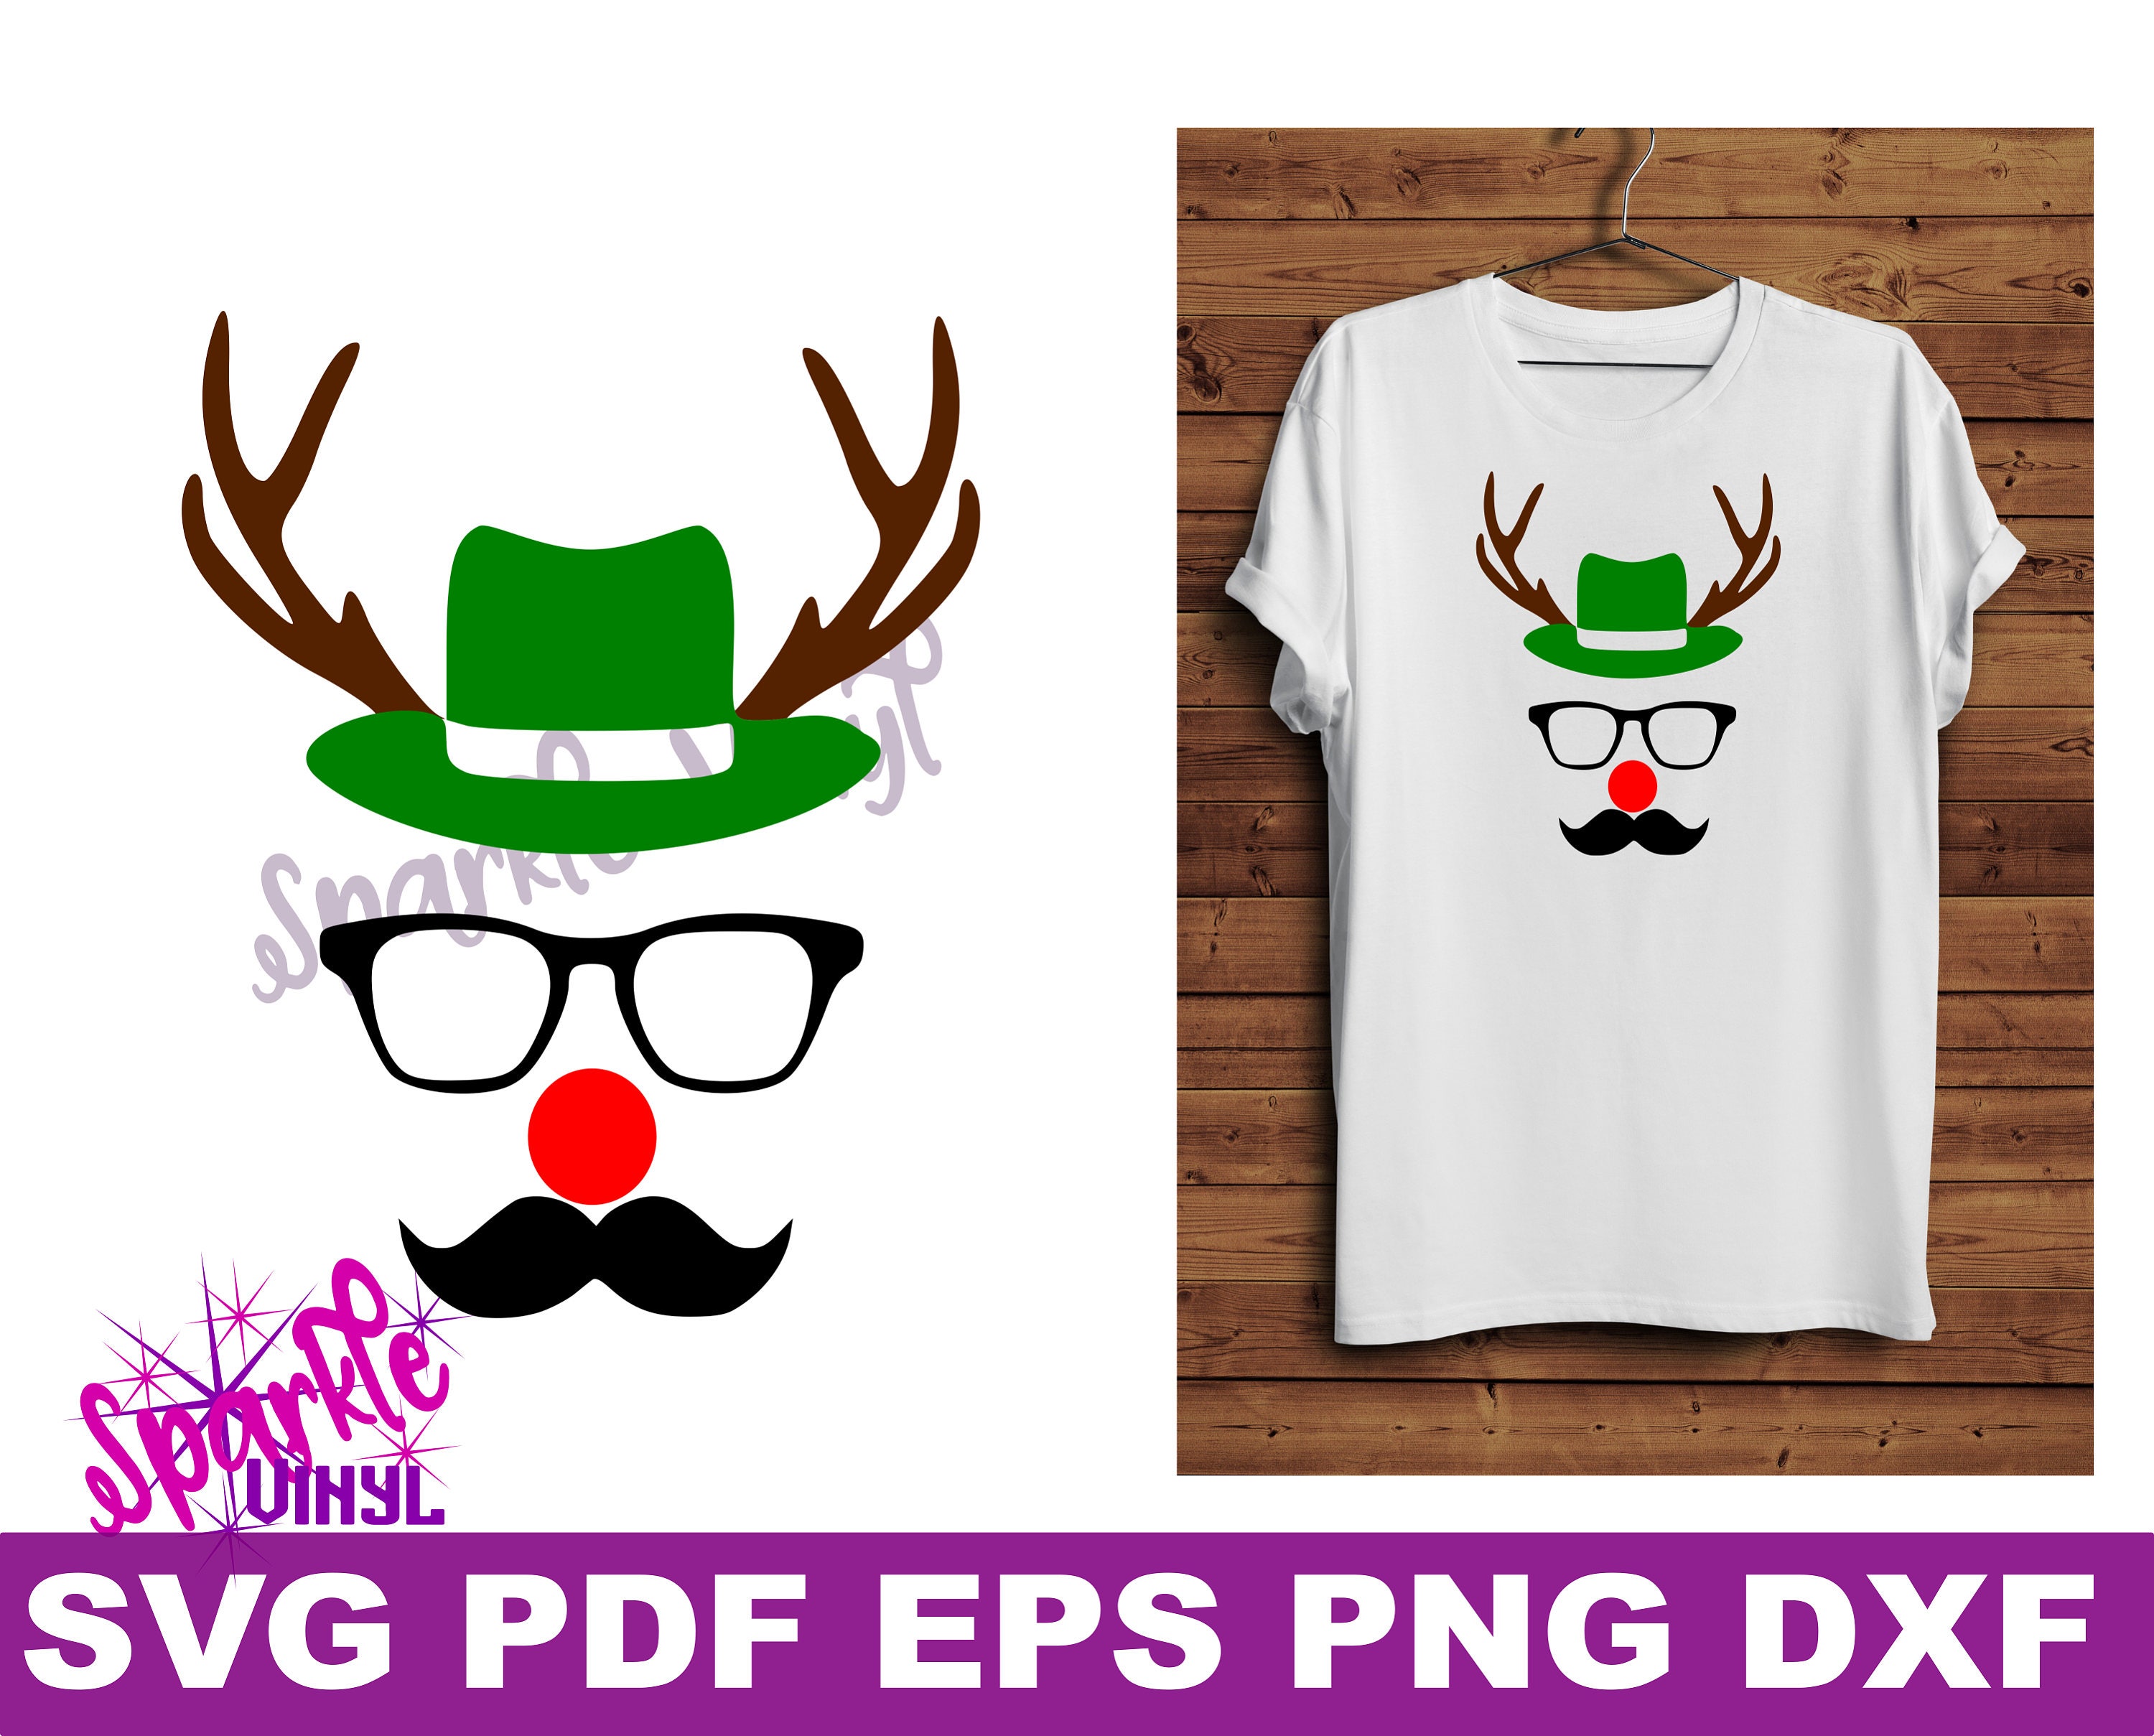 Svg Christmas Reindeer shirt tshirt sign face with hat glasses